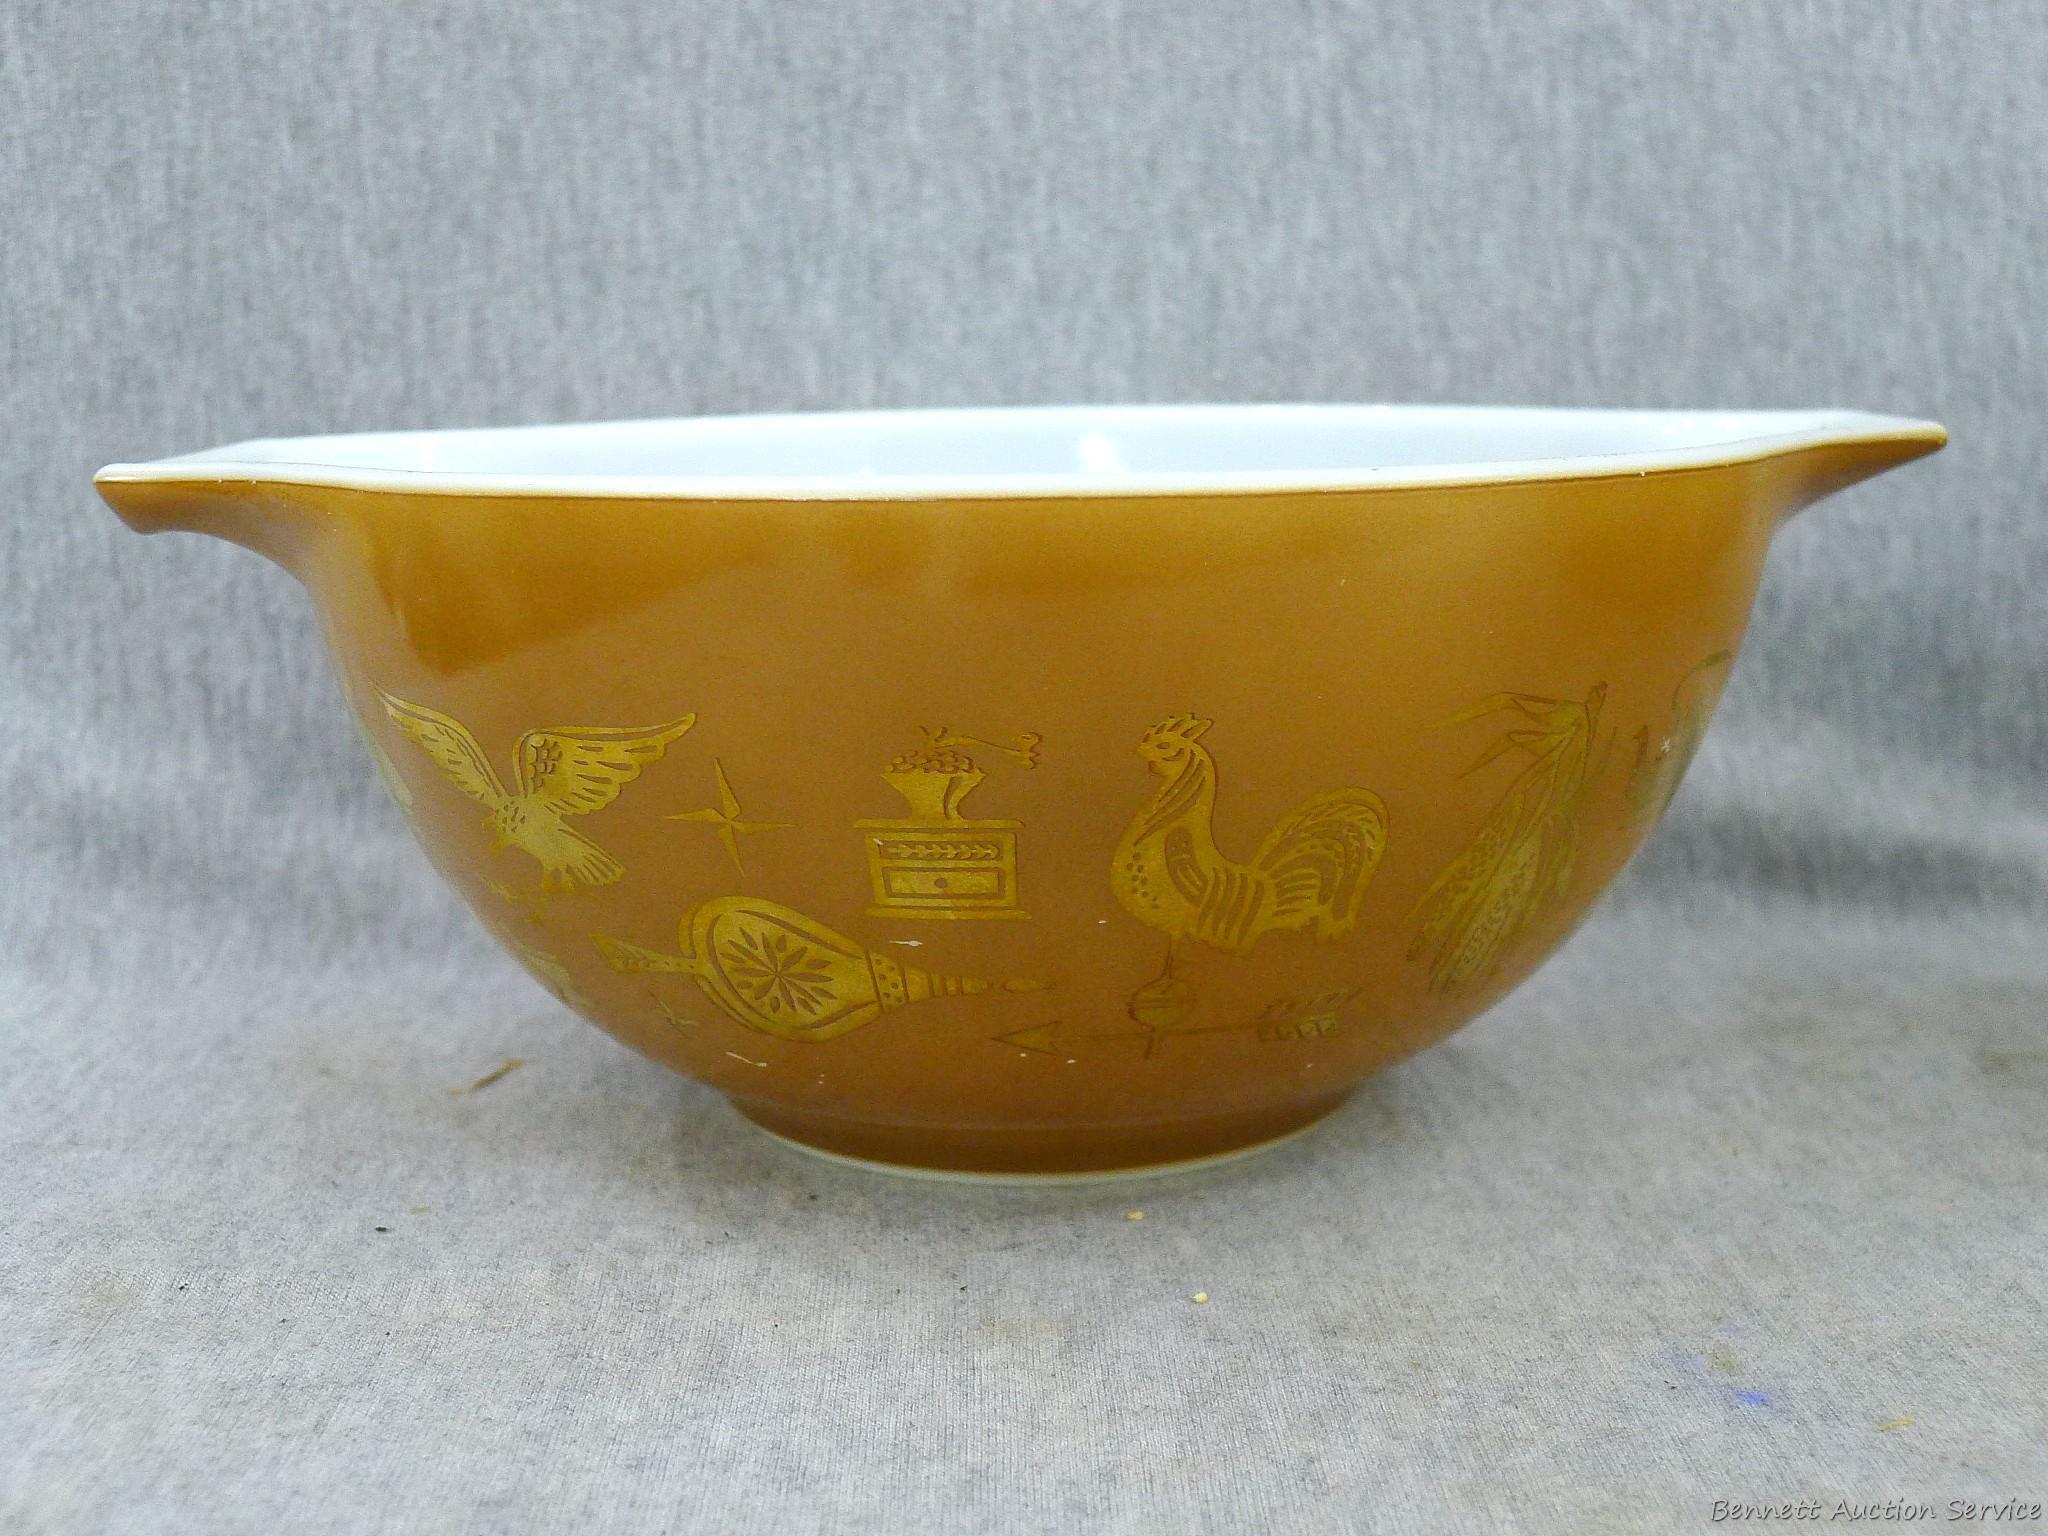 Matching set of 4 Pyrex Early American mixing bowls; largest bowl measures 10" x 13" over handles x